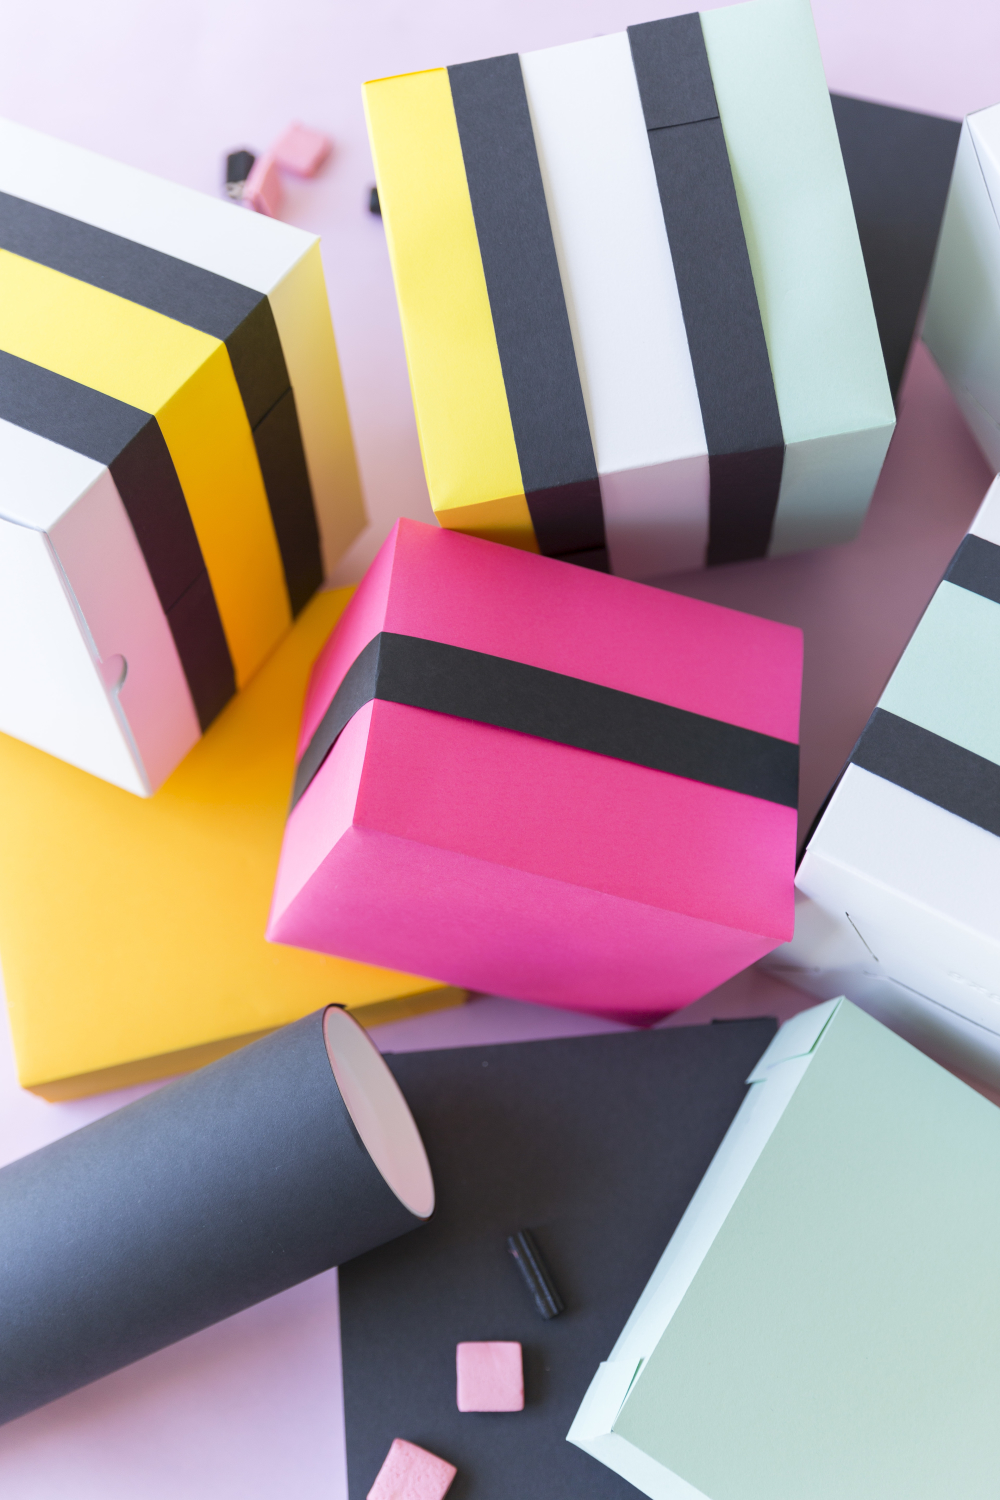 DIY licorice allsorts wrapping paper